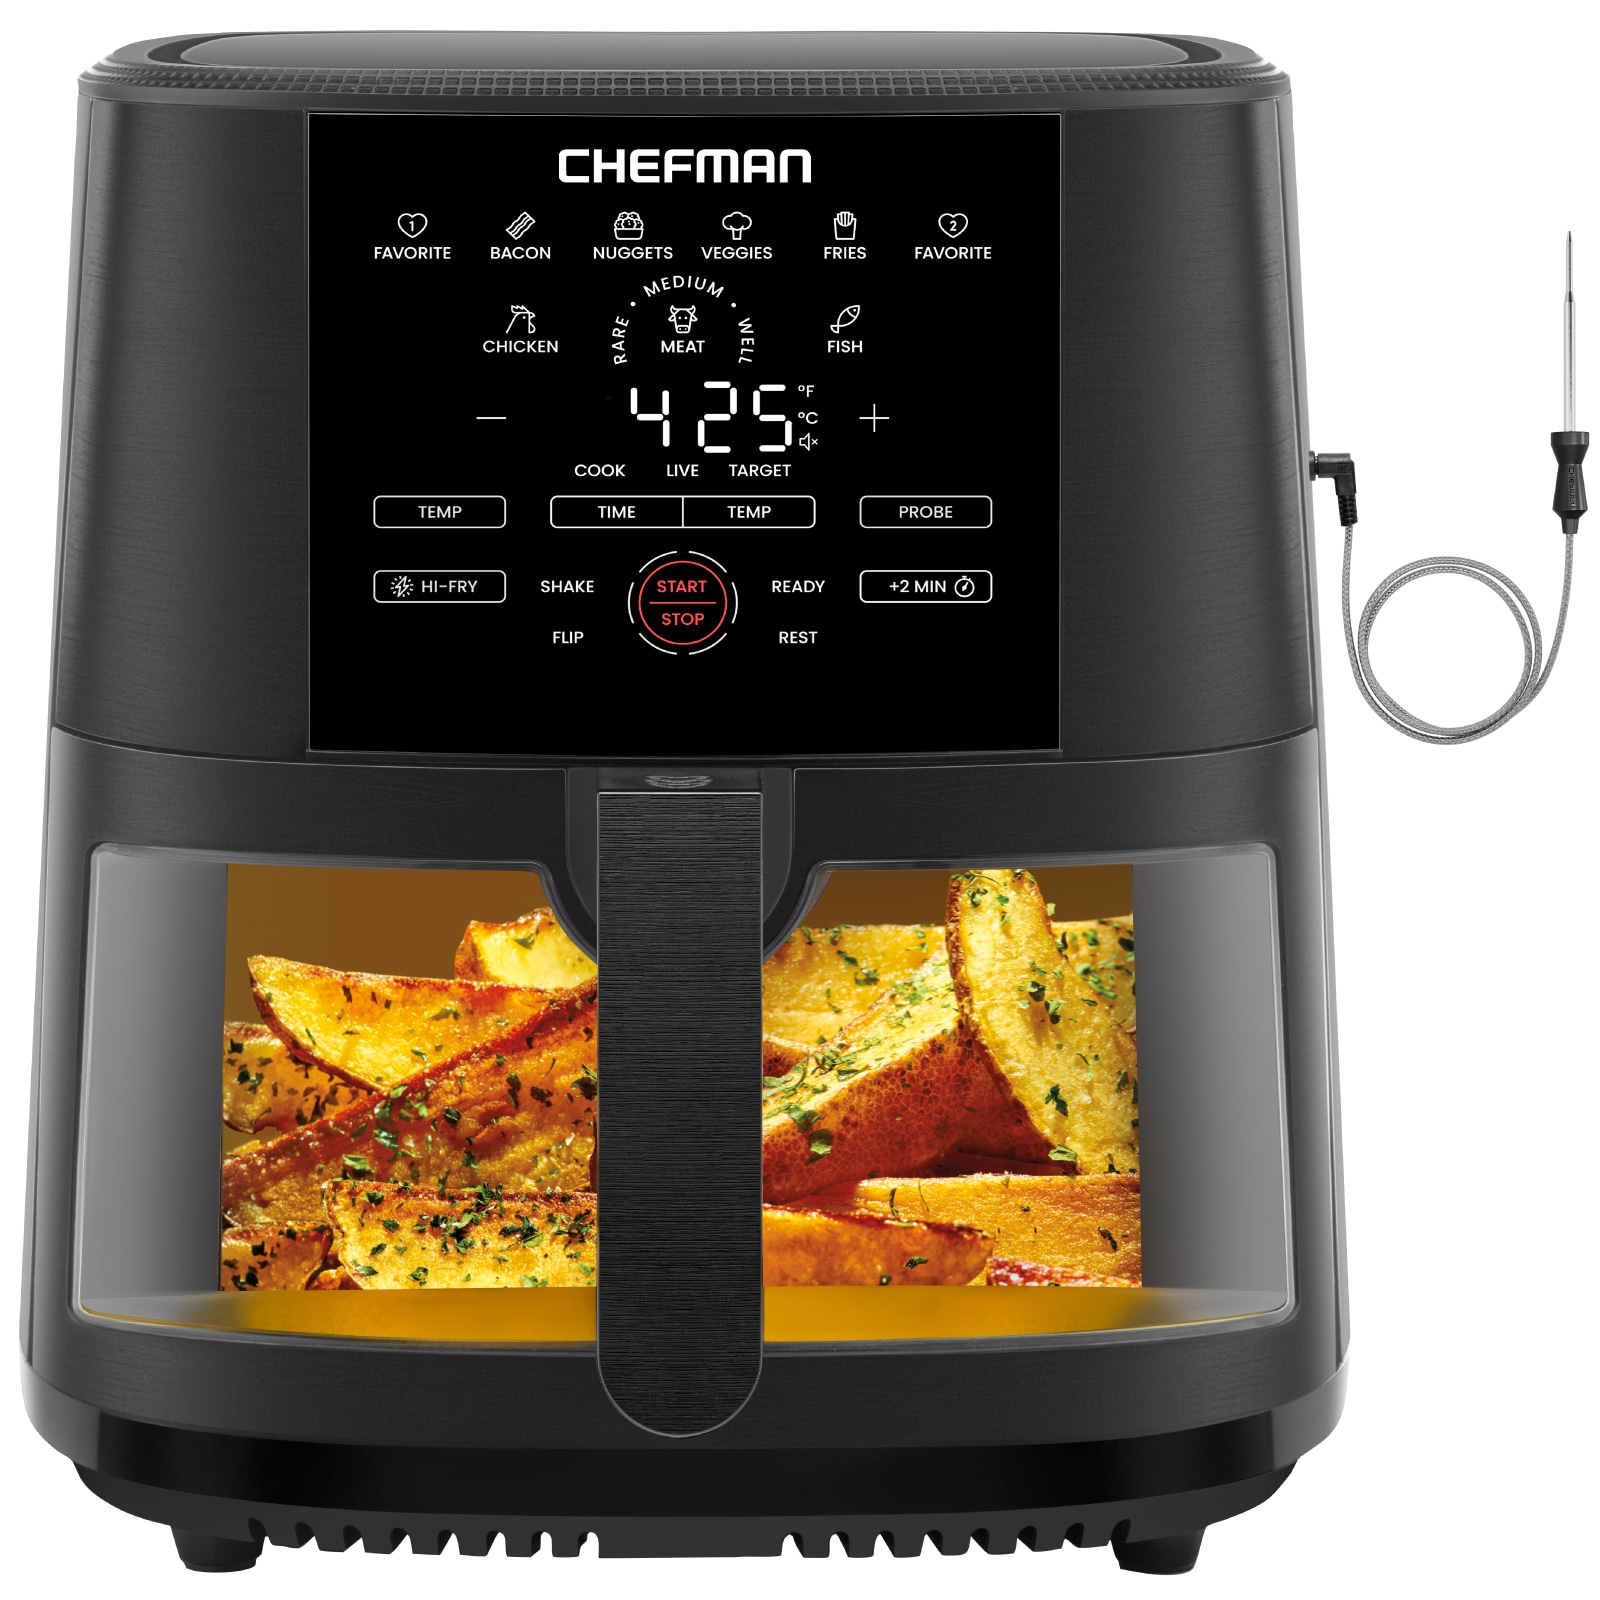 Chefman Black Air Fryer Oven 1700W Touch Control Programmable cETLus Safety  Listed - Versatile Countertop Cooking, Rapid Air Heating, Healthy Meals